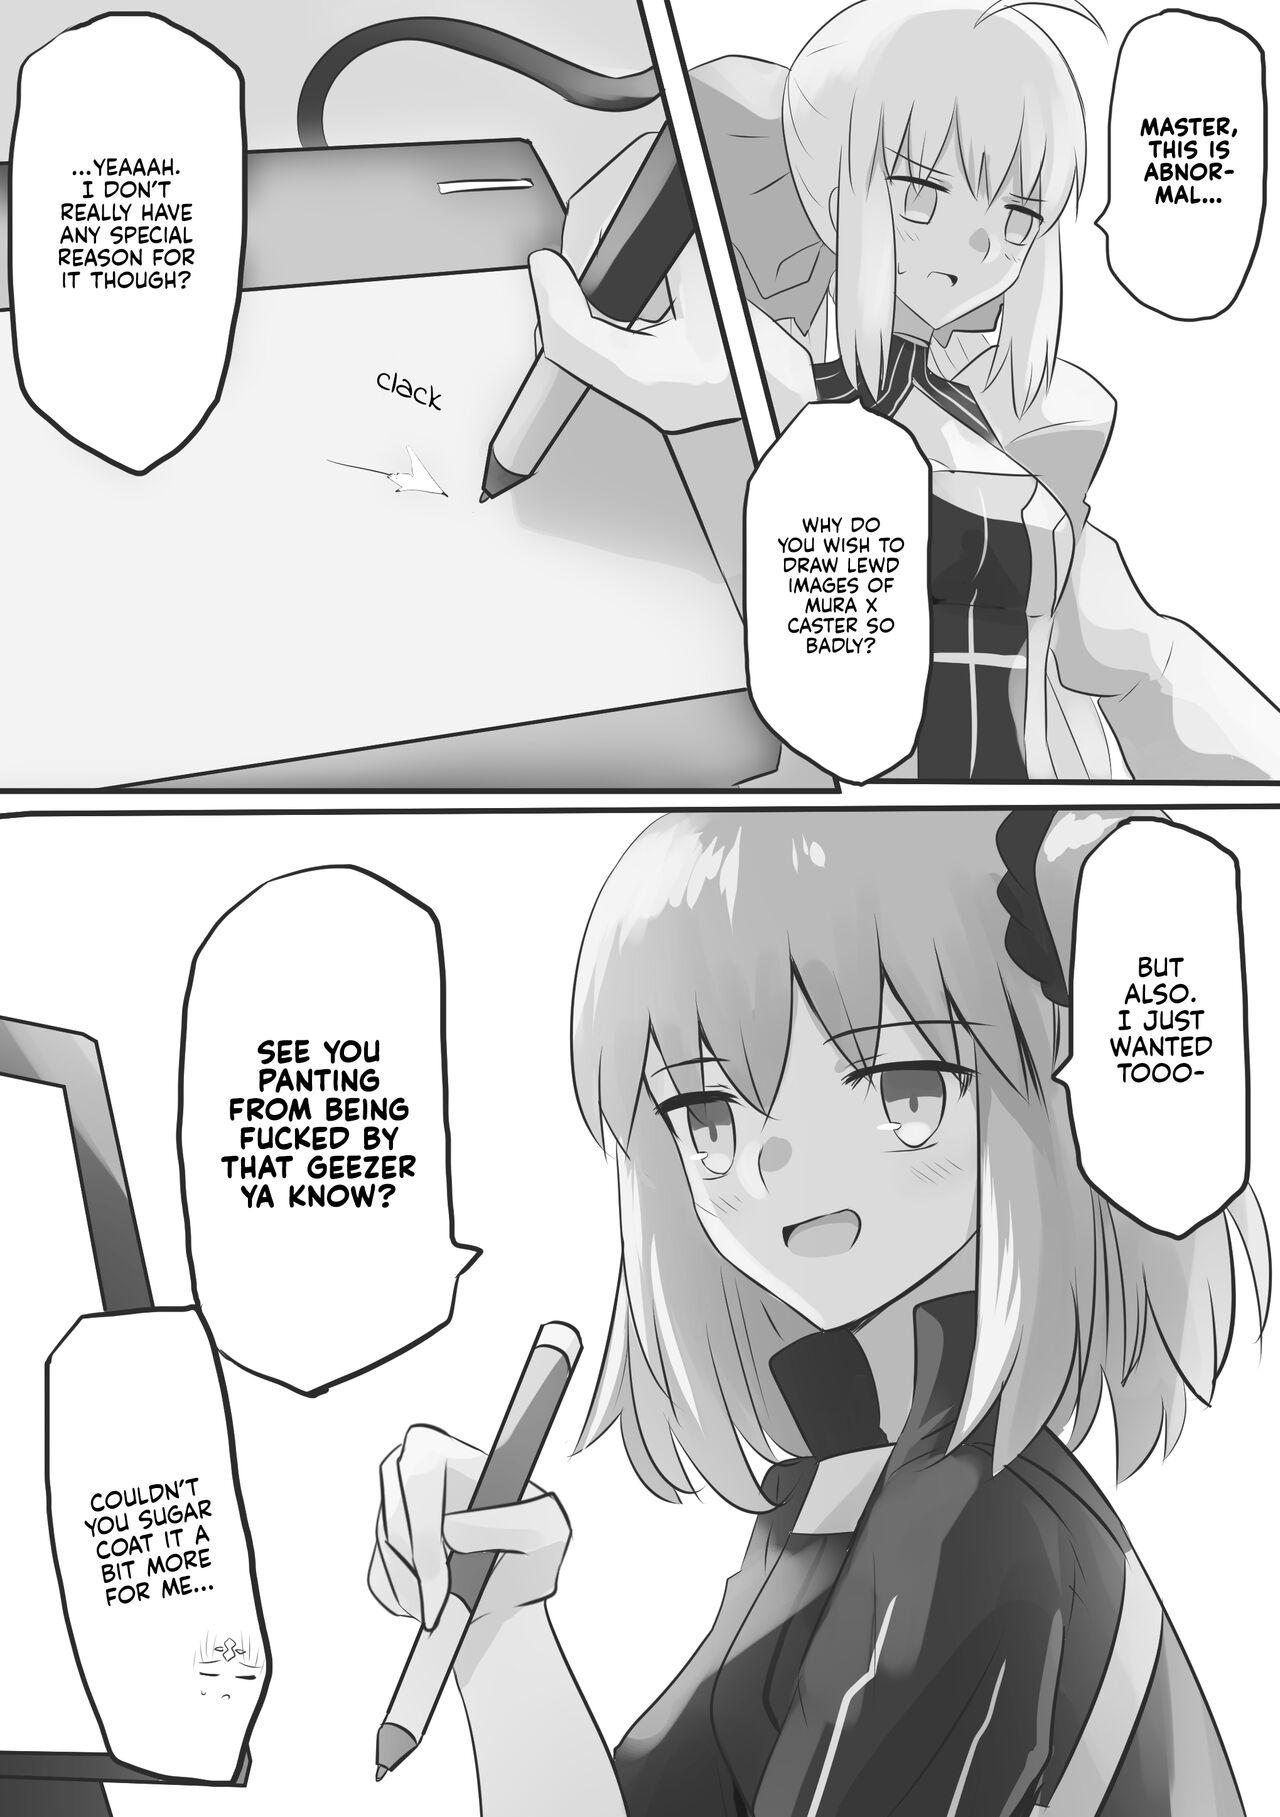 Pussy Fucking Mura x Caster 1 - Fate grand order Argentina - Page 3